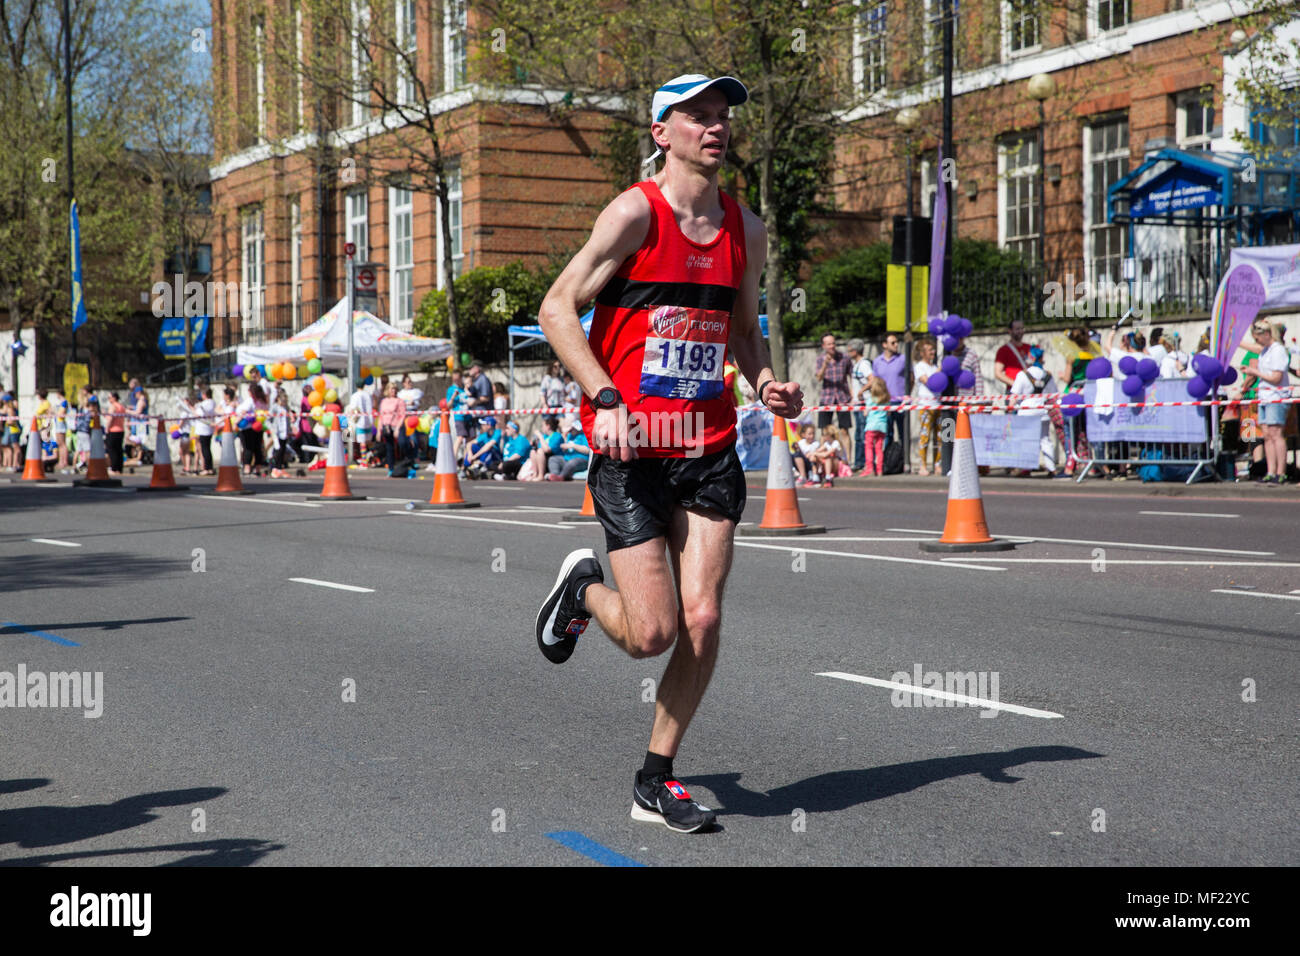 London, UK. 22nd April, 2018. Mark Wilkins of Medway and Maidstone AC competes in the 2018 Virgin Money London Marathon. The 38th edition of the race was the hottest on record with a temperature of 24.1C recorded in St James’s Park. Stock Photo